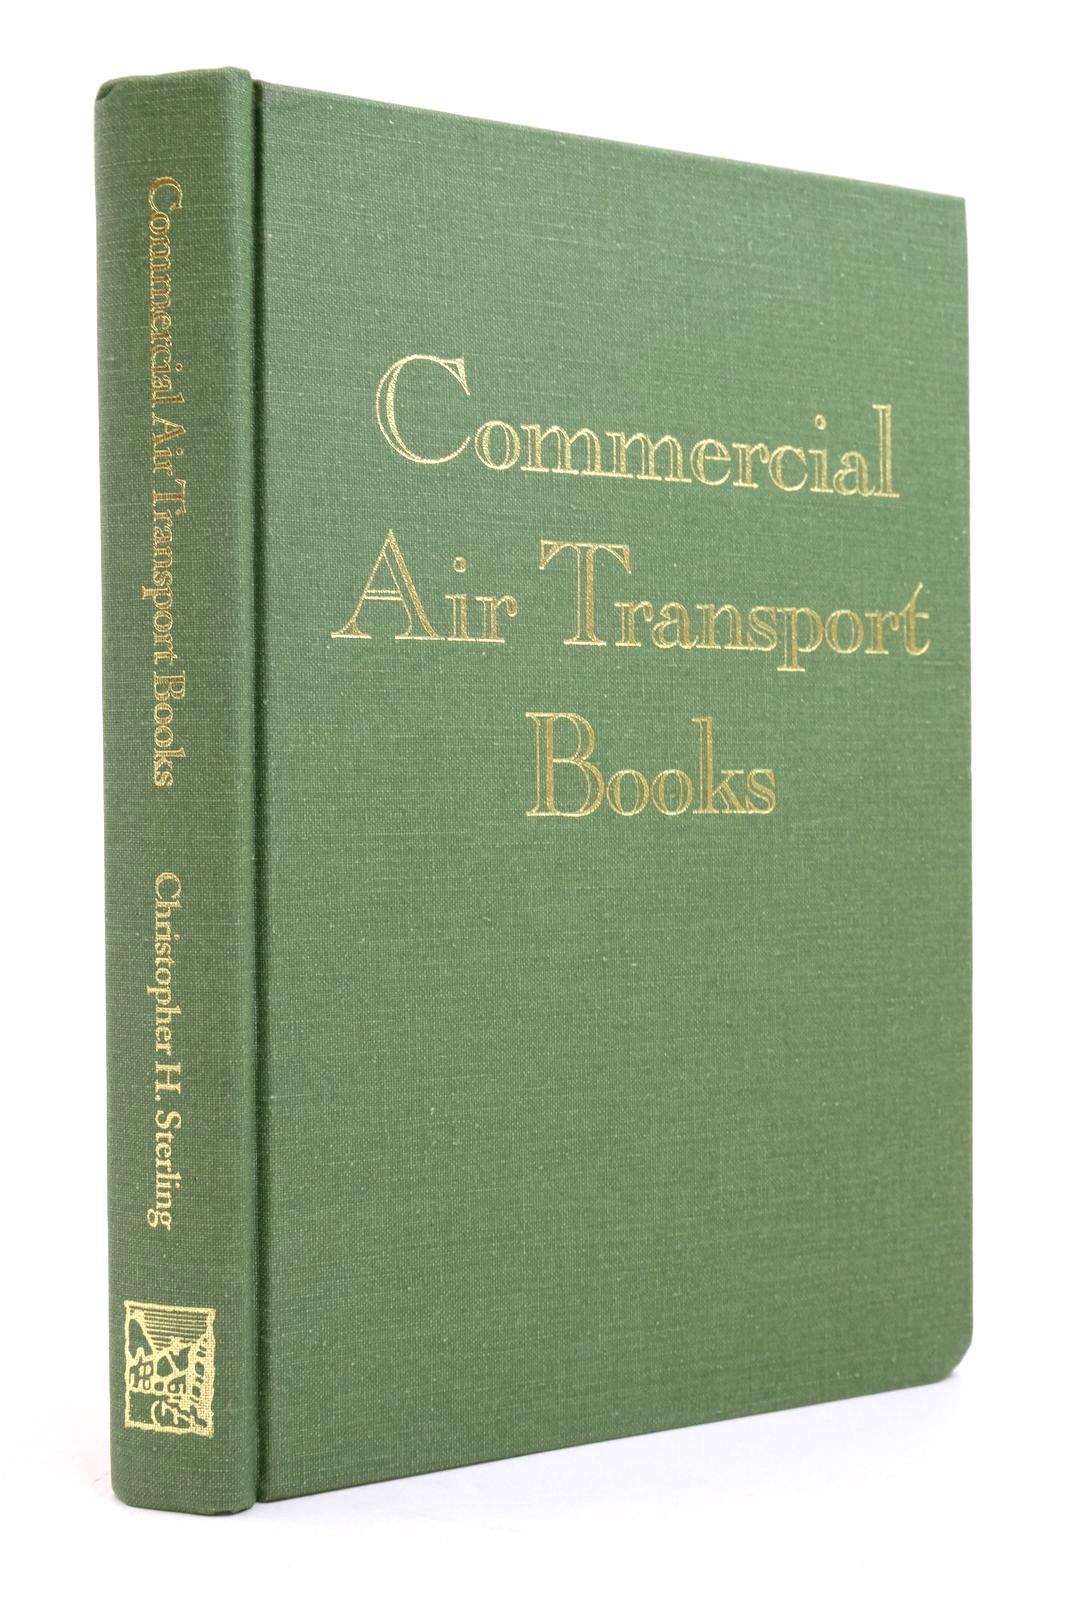 Photo of COMMERCIAL AIR TRANSPORT BOOKS written by Sterling, Christopher H. published by Paladwr Press (STOCK CODE: 2138571)  for sale by Stella & Rose's Books